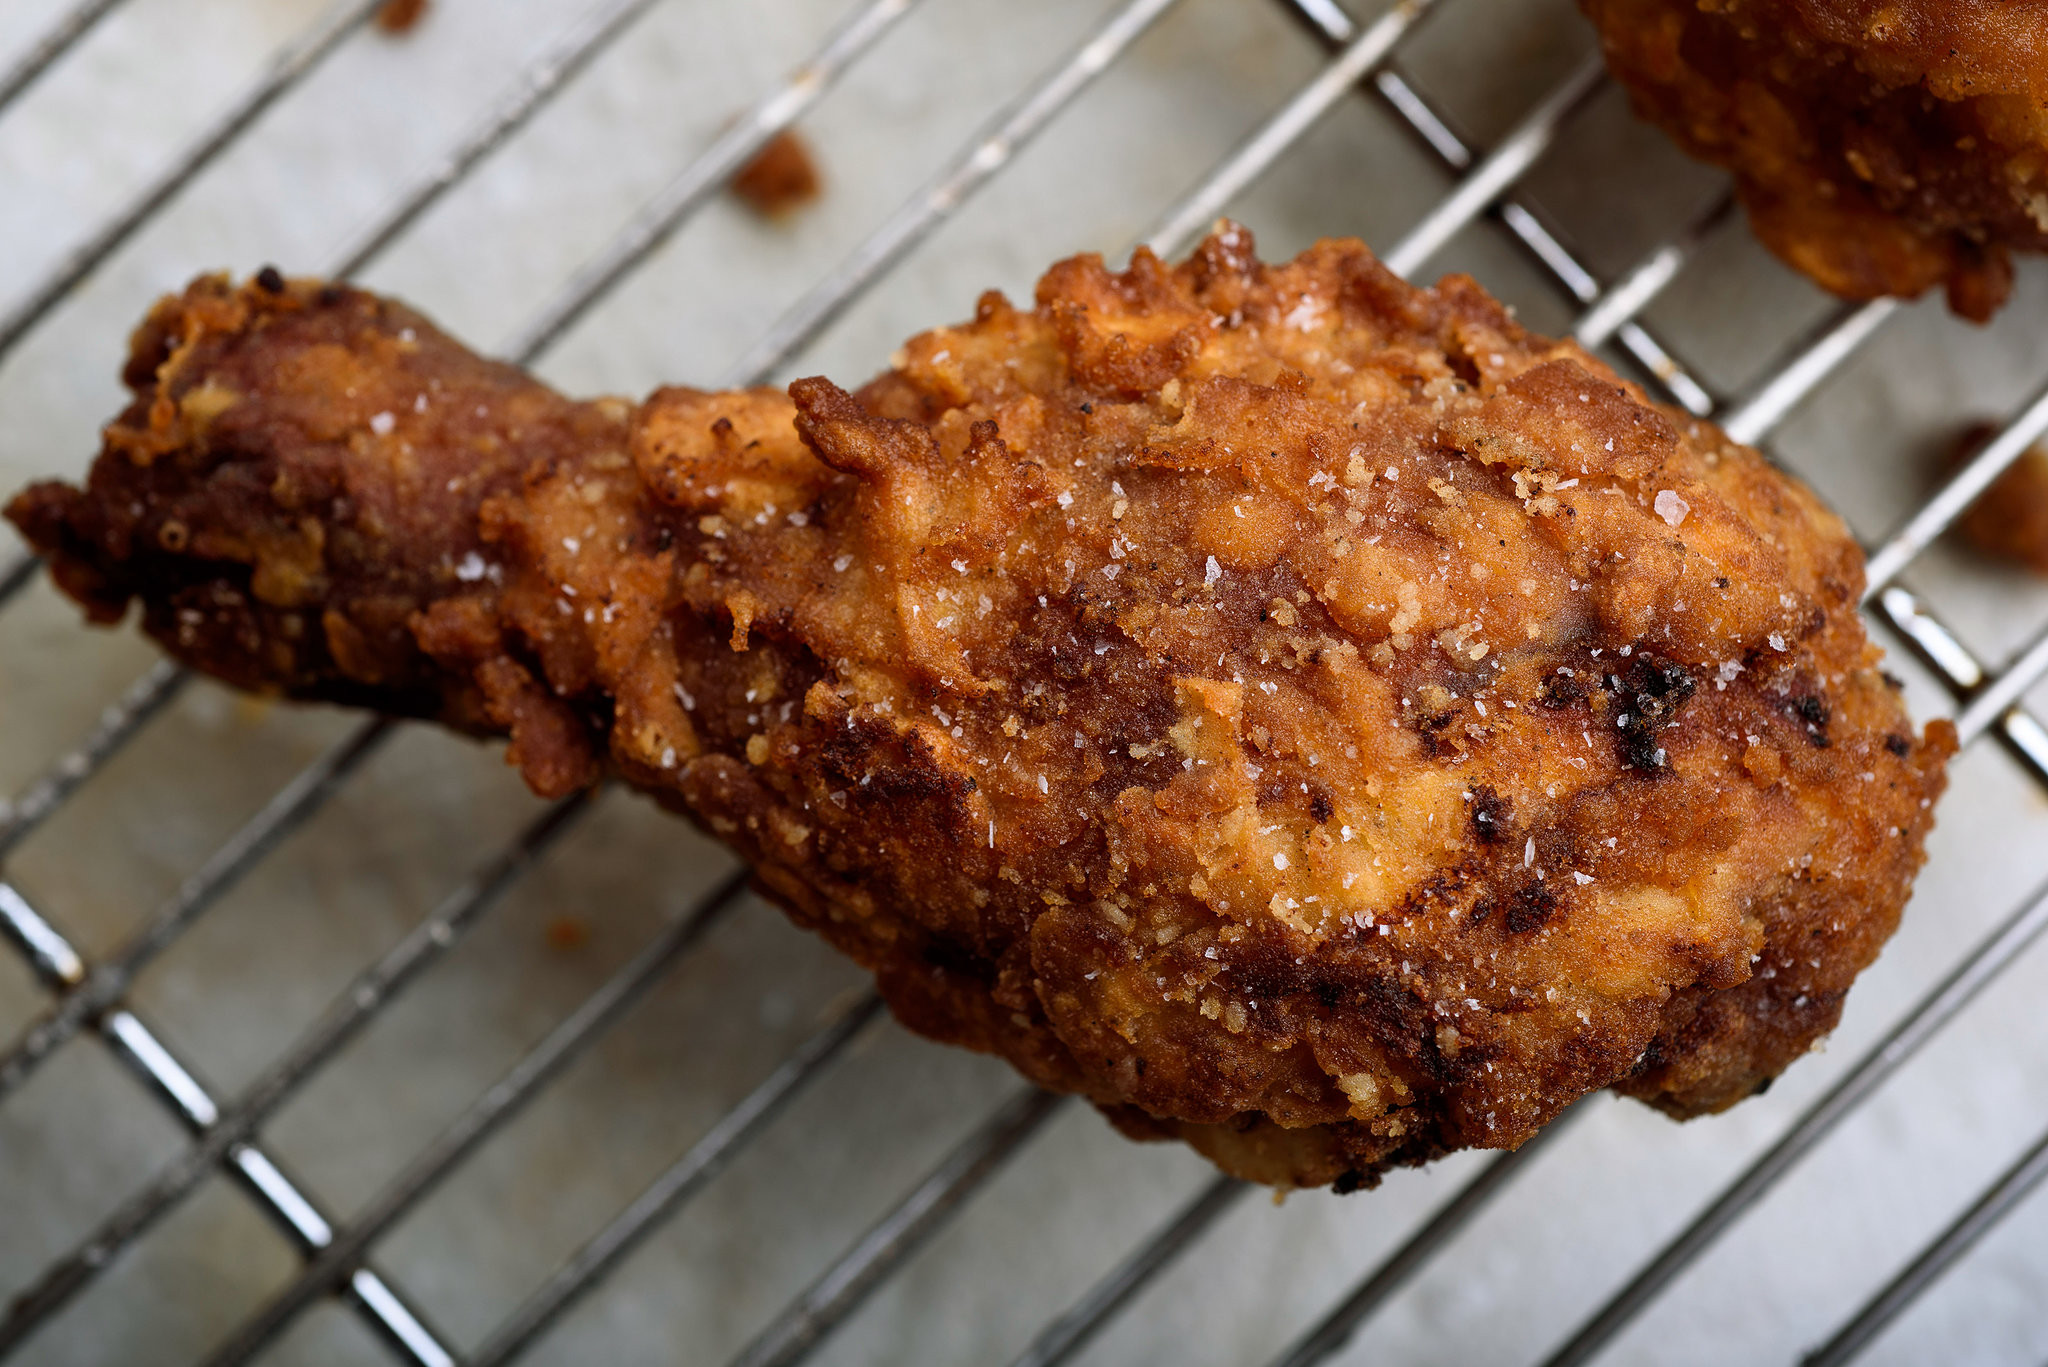 Making Fried Chicken
 How to Make Fried Chicken NYT Cooking